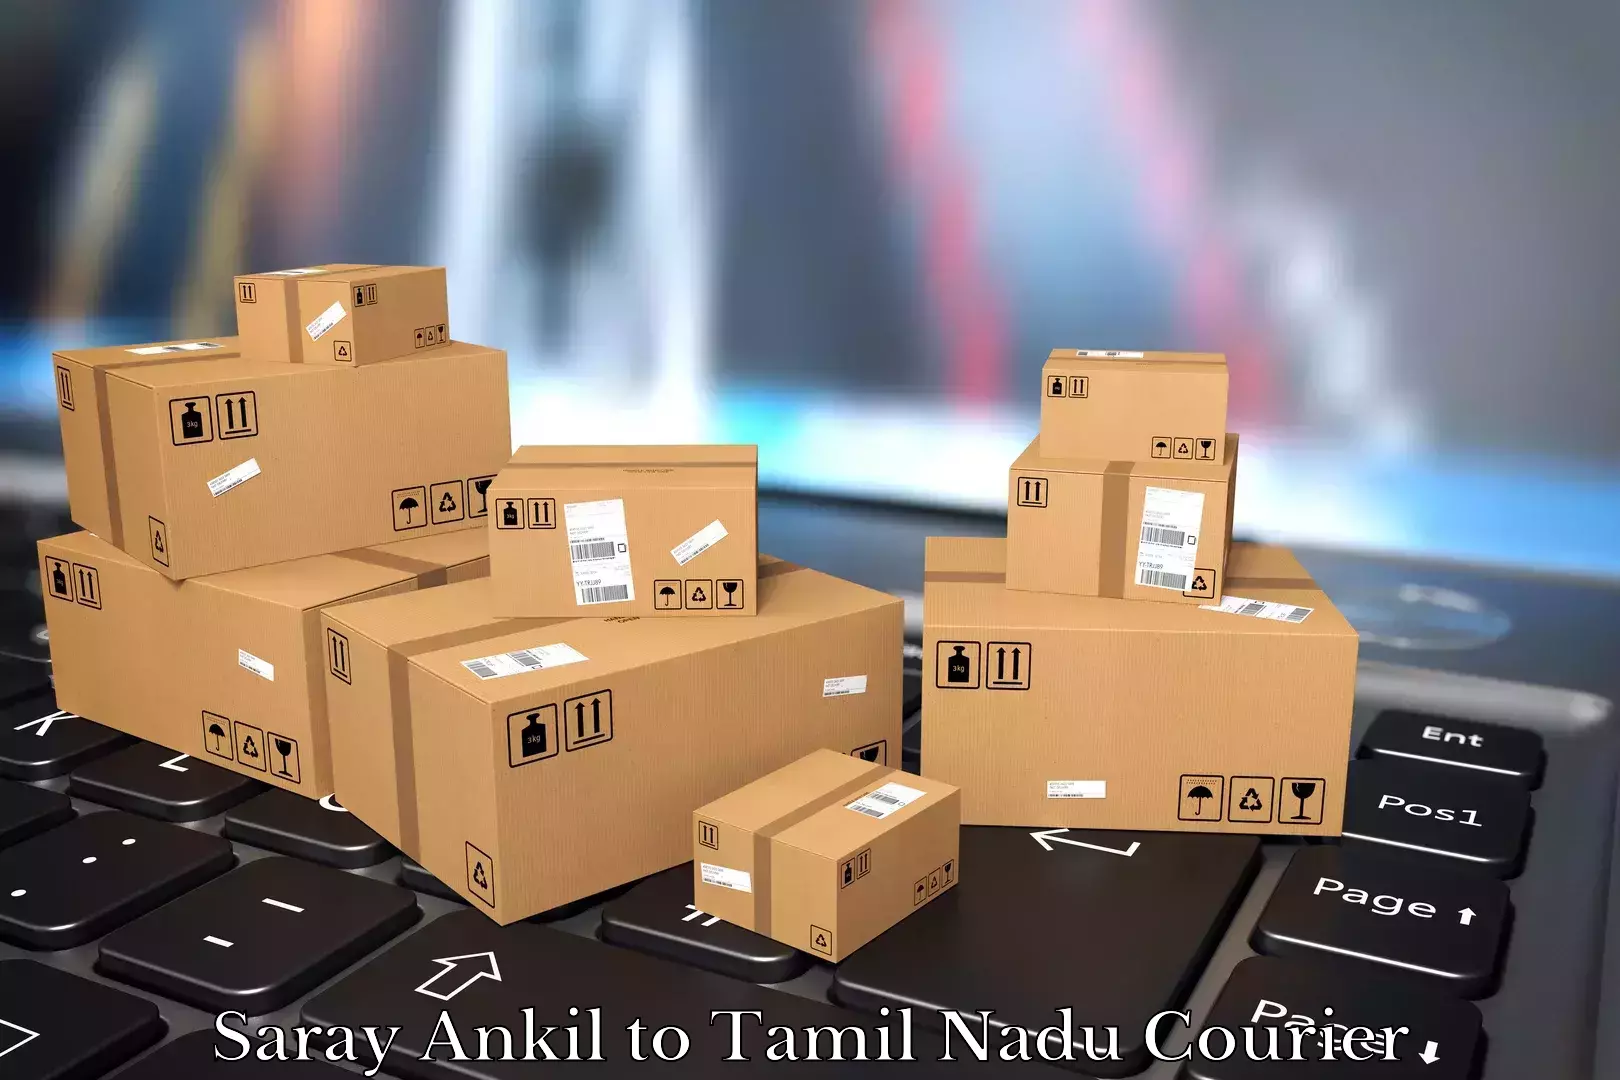 Professional packing and transport Saray Ankil to Tamil Nadu